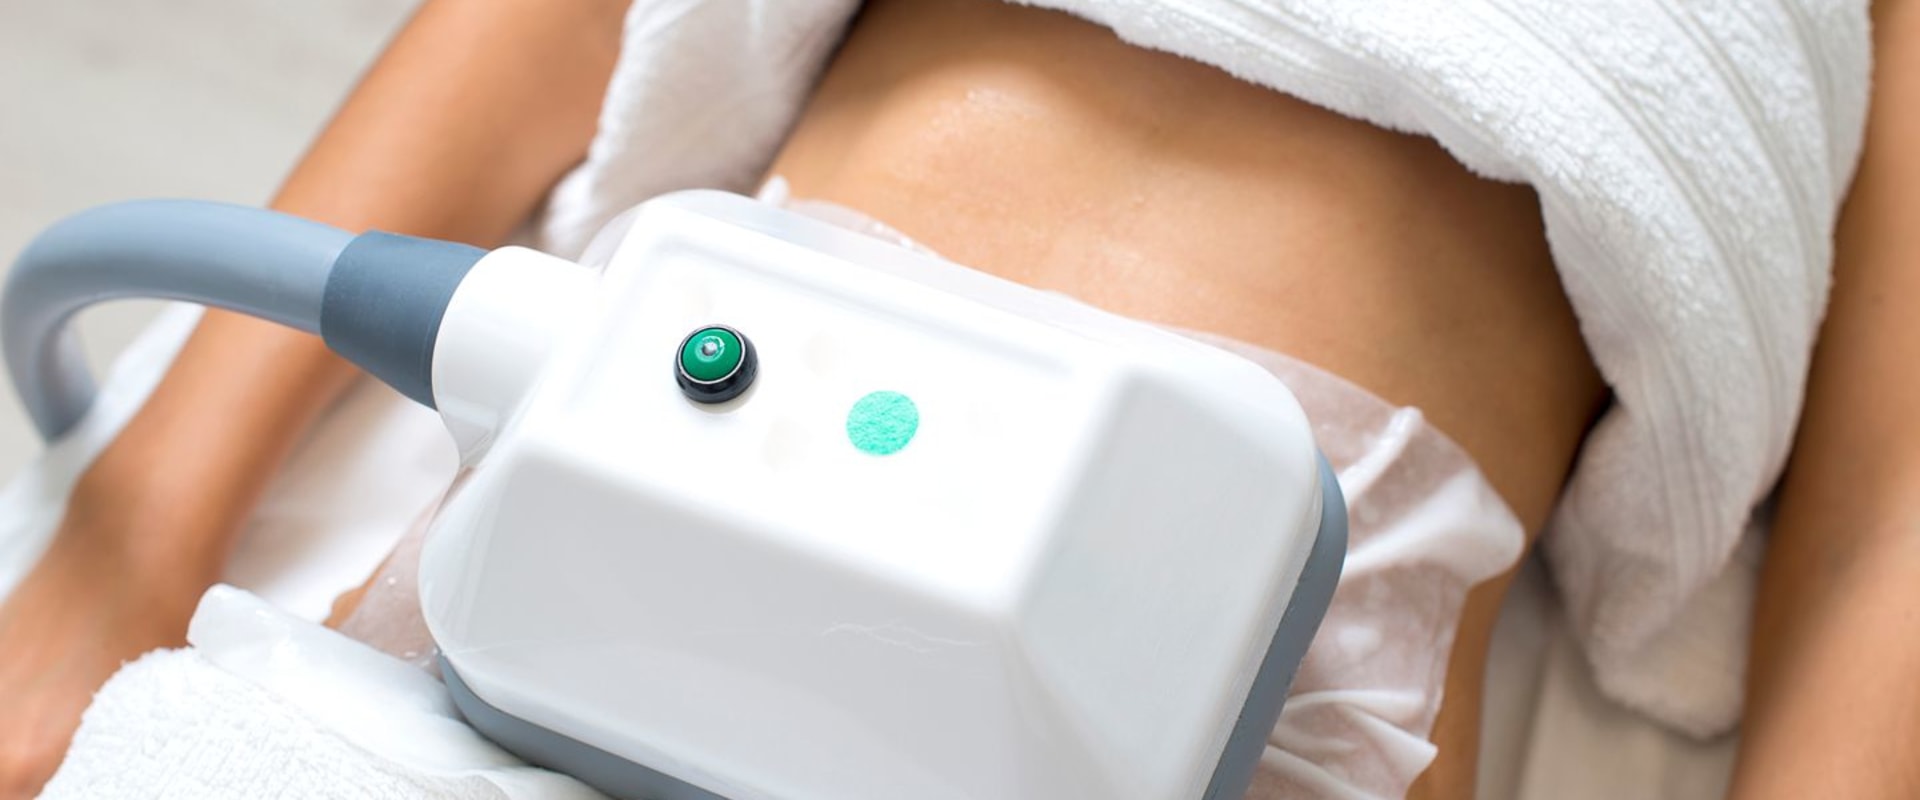 The Different Types of Fat Reduction Treatments Explained